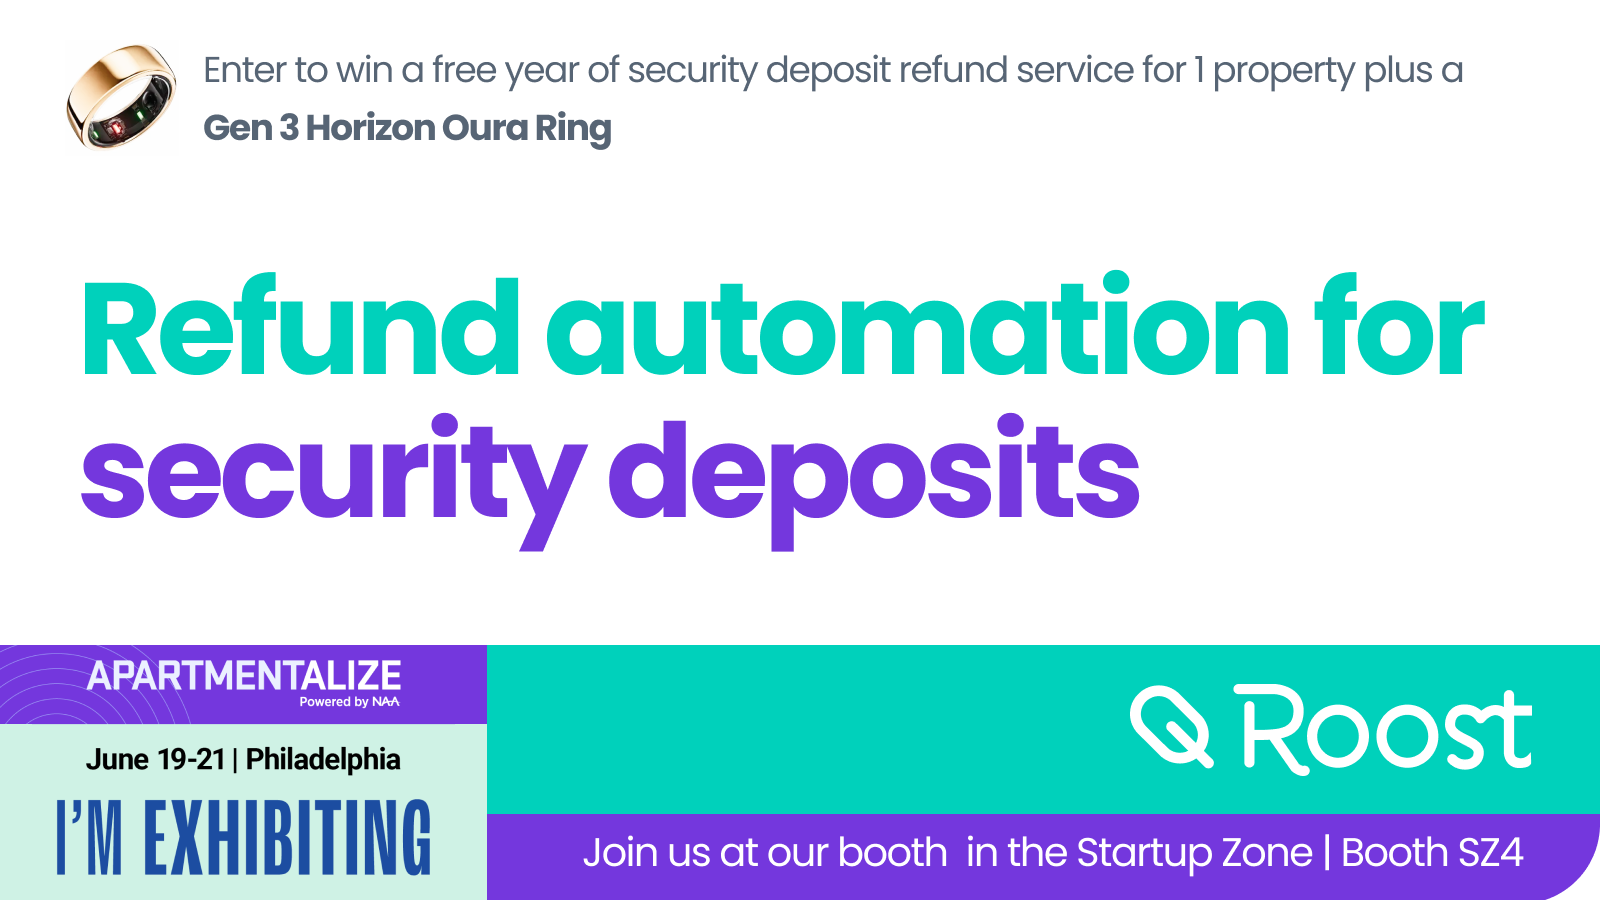 Looking forward to seeing everyone at the National Apartment Association (Naahq) hashtag#Apartmentalize2024 Conference in June!

Drop by the Startup Zone Booth SZ4 for your Refund automation for security deposits demo, and to enter to win a free year of security deposit refund service for 1 property plus a Gen 3 Horizon Our Ring!